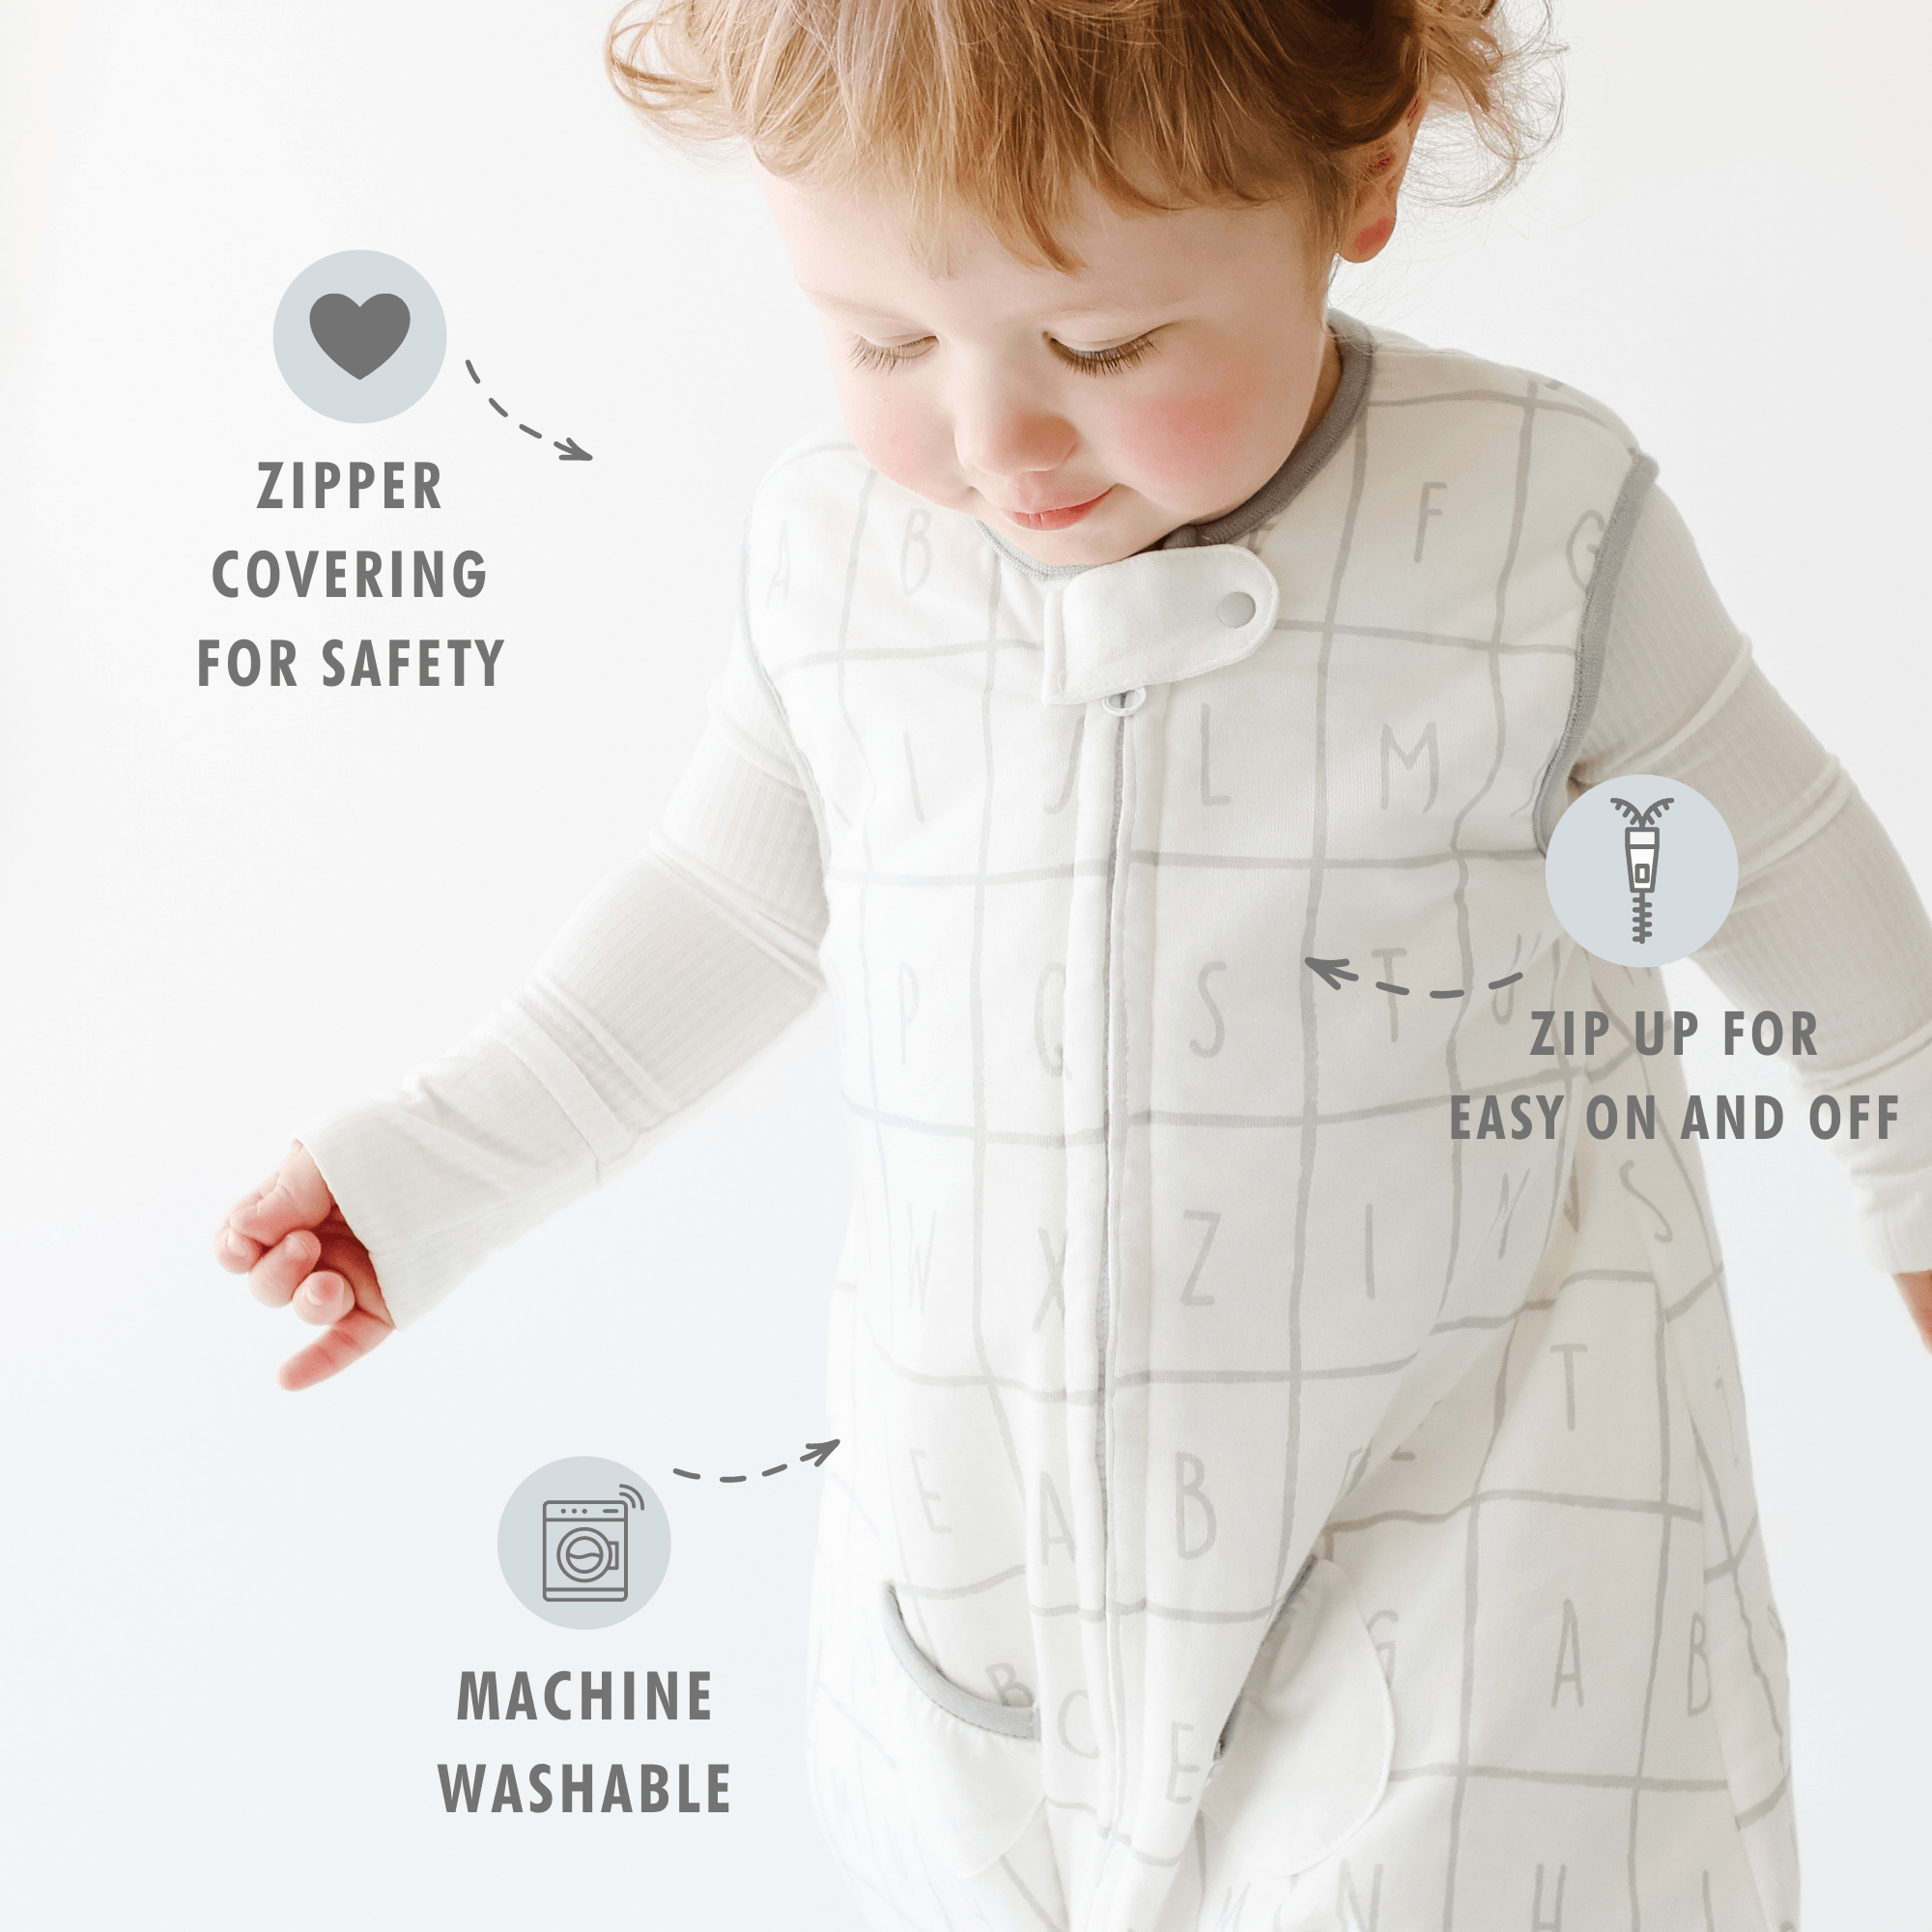 Tealbee Dreamsuit - zipper covering for safety, zip up for easy on and off, machine washable.